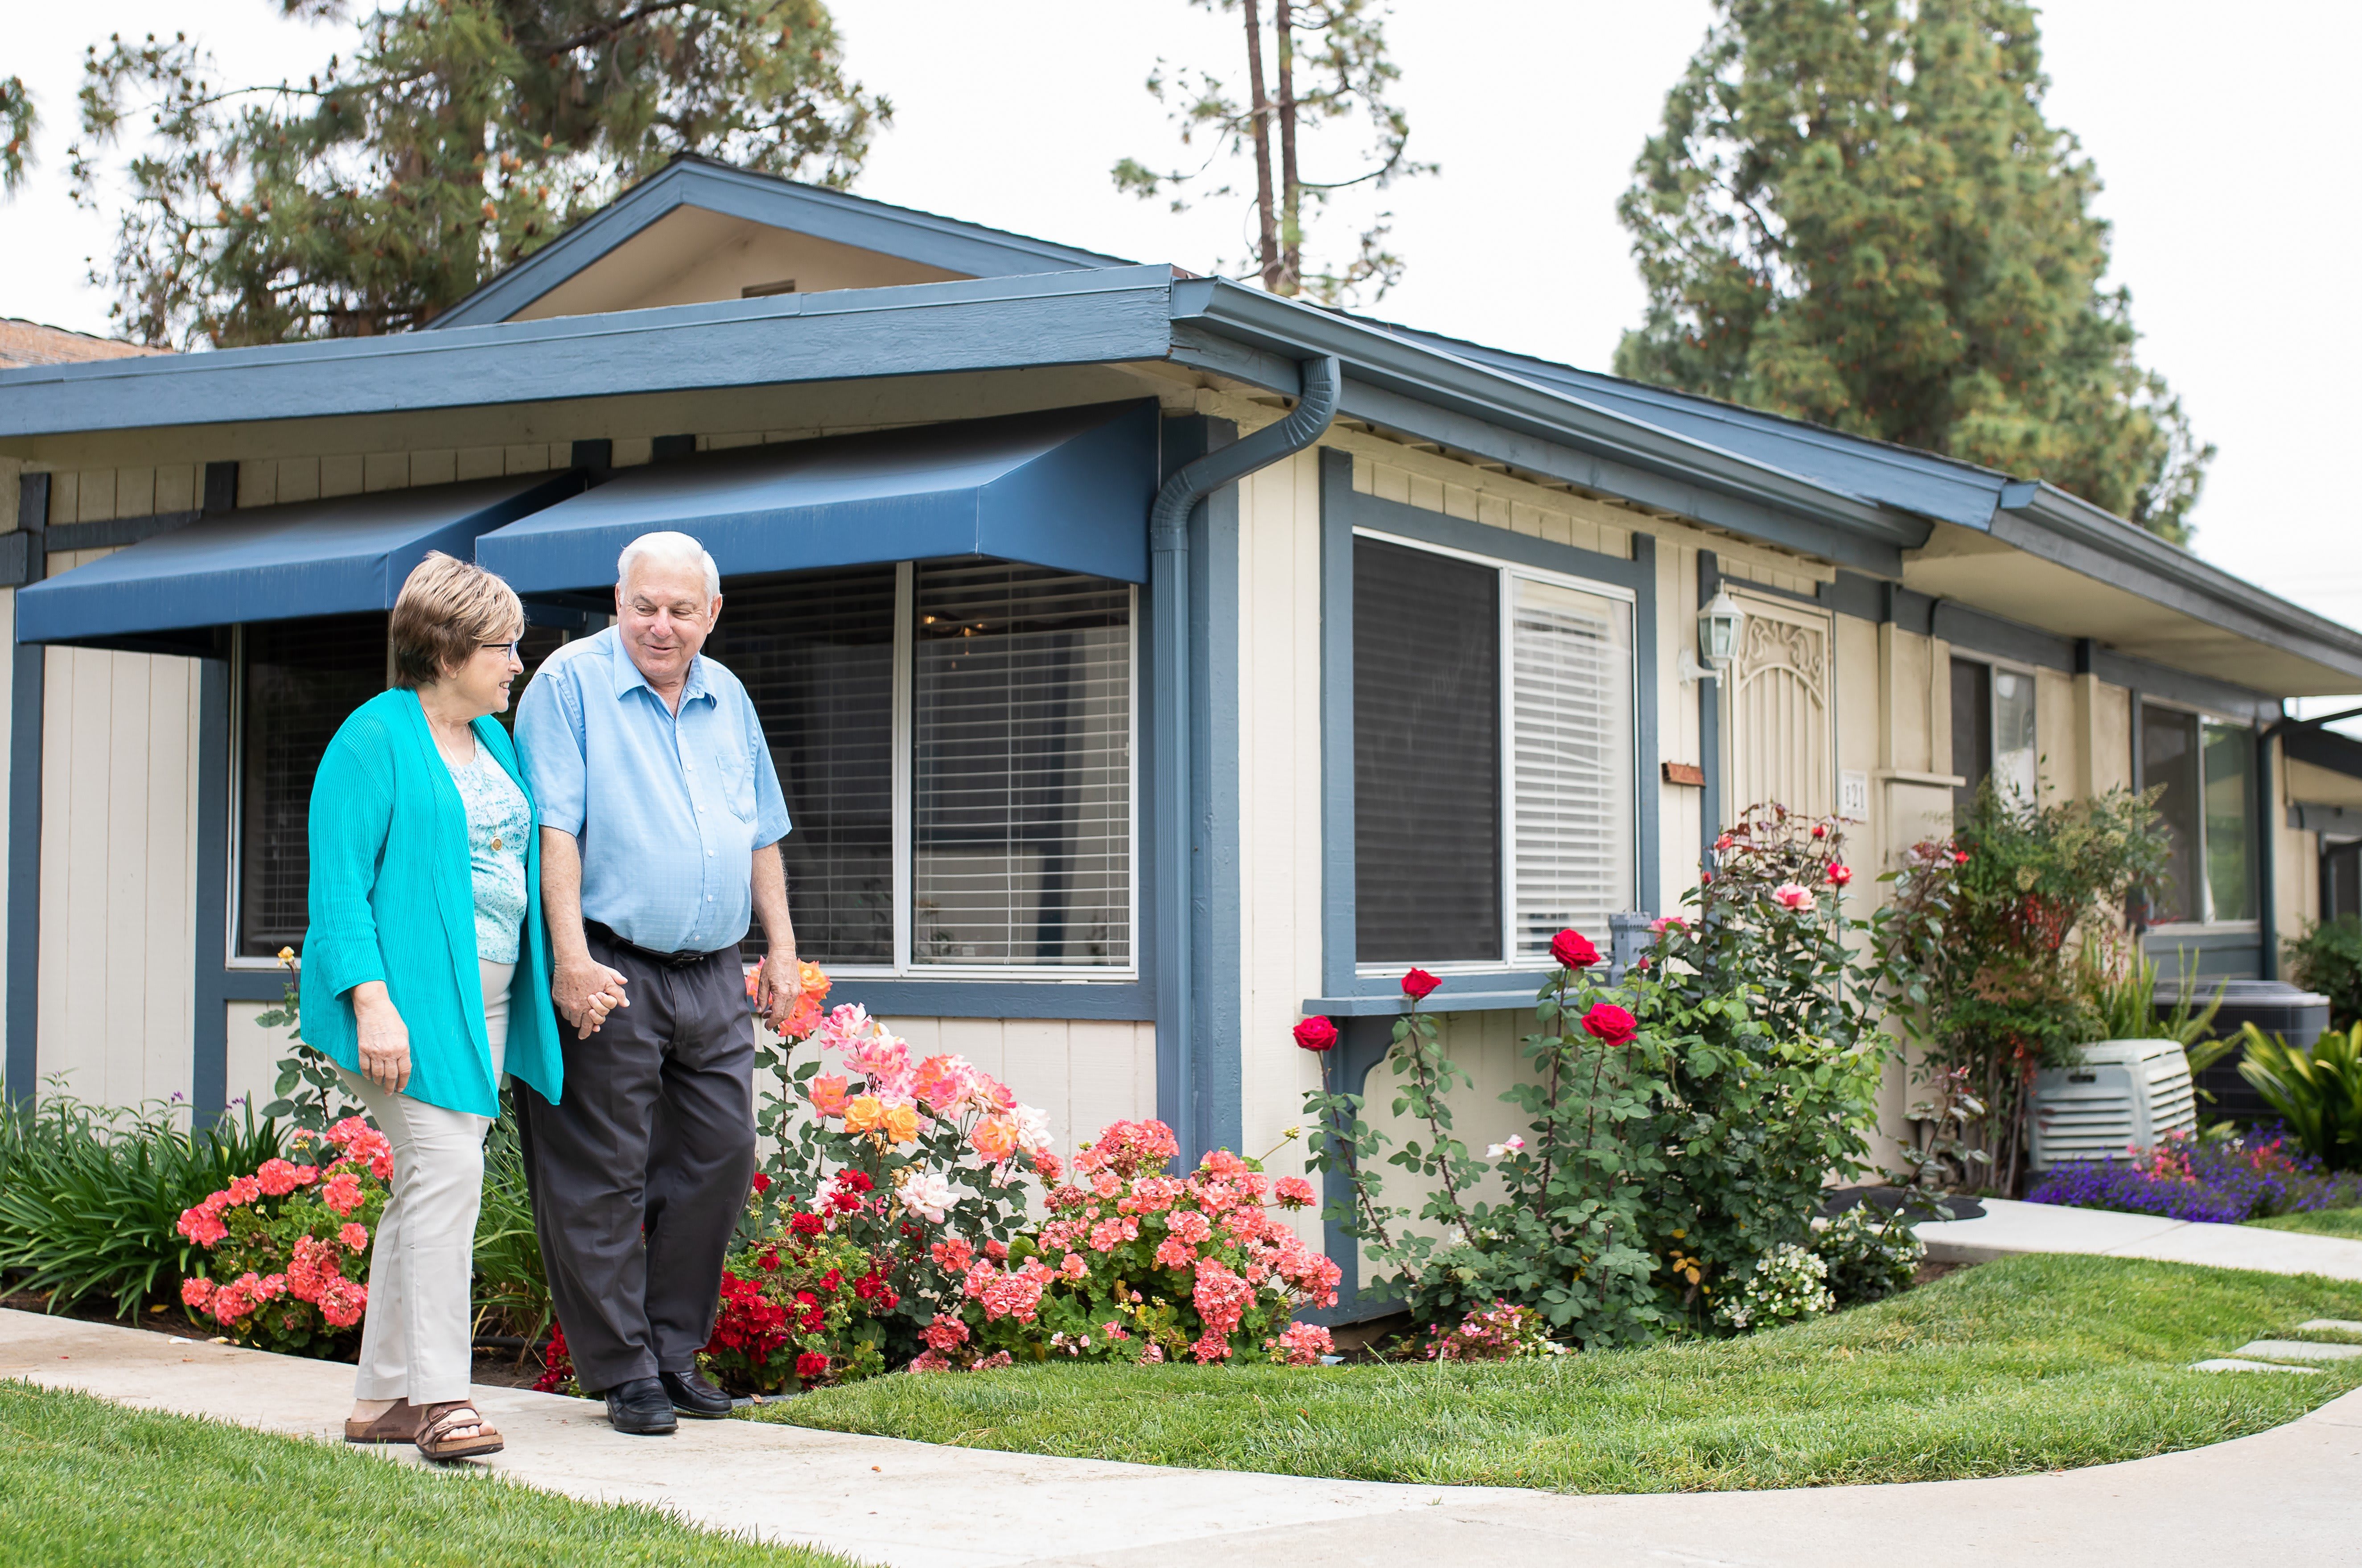 Redwood Terrace, a CCRC residents